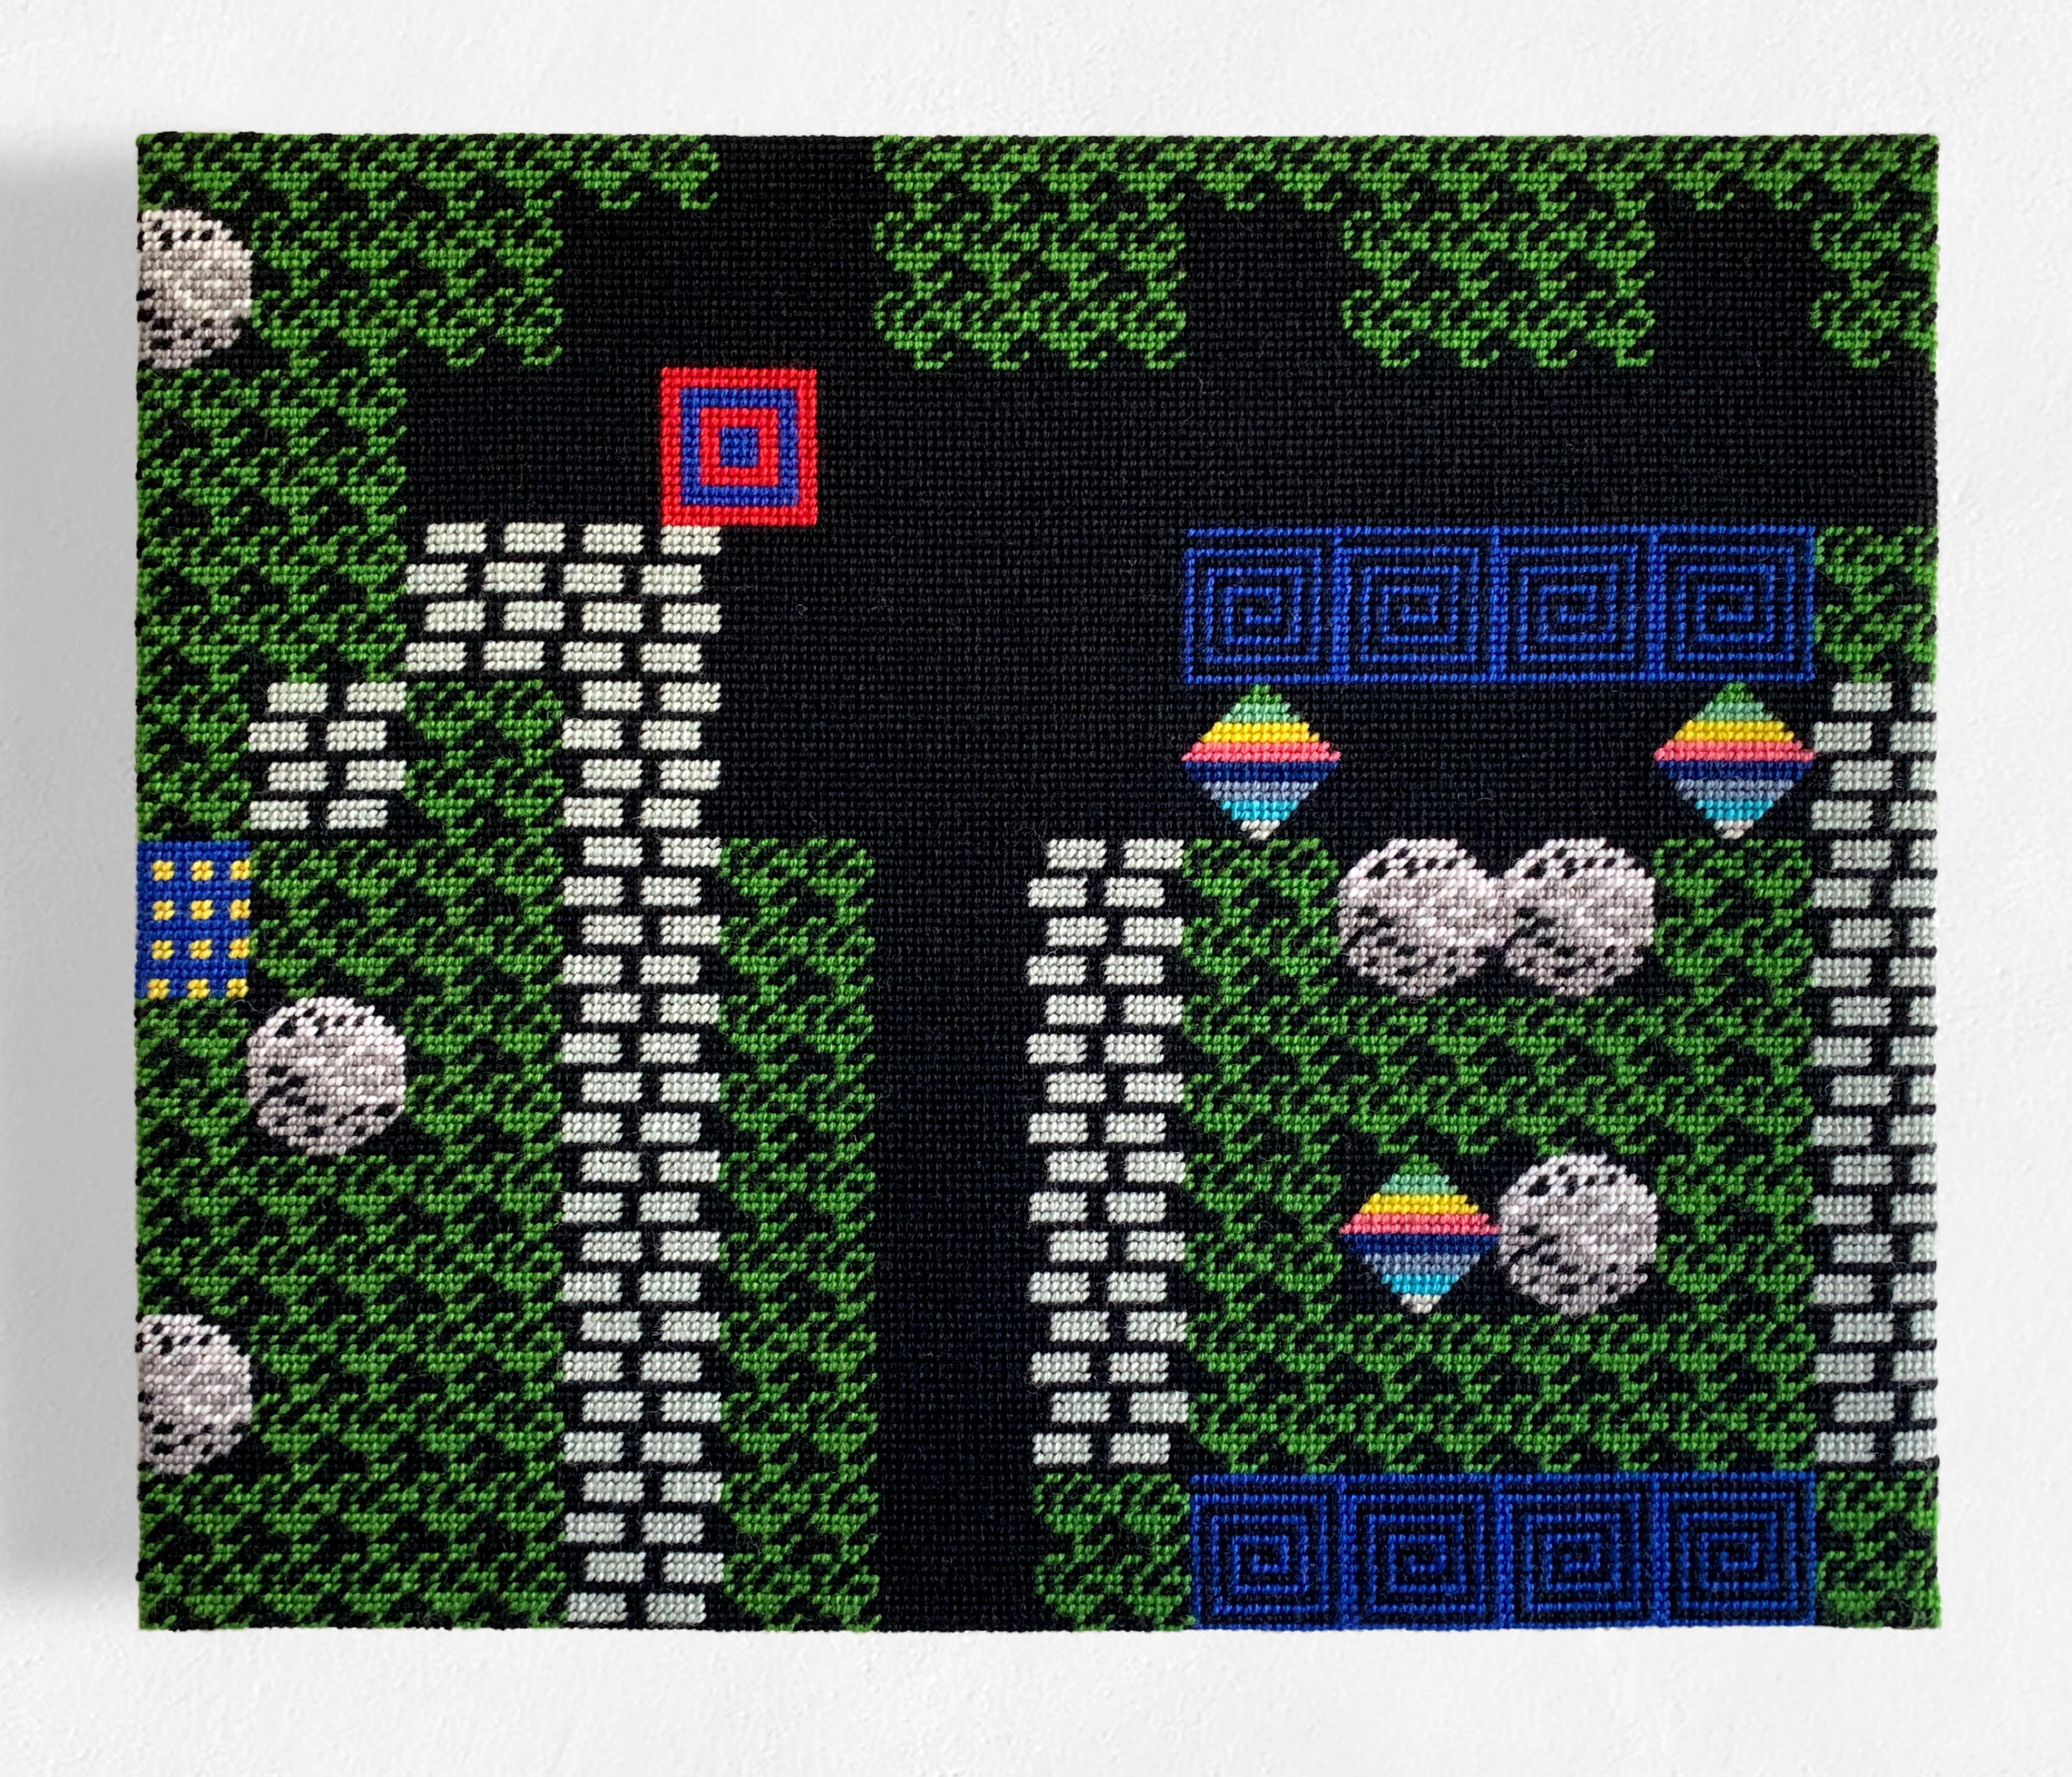  / Needlepoint of an area from the video game *La mine aux diamants* in its MO5 version. Art by artist Marine Beaufils.